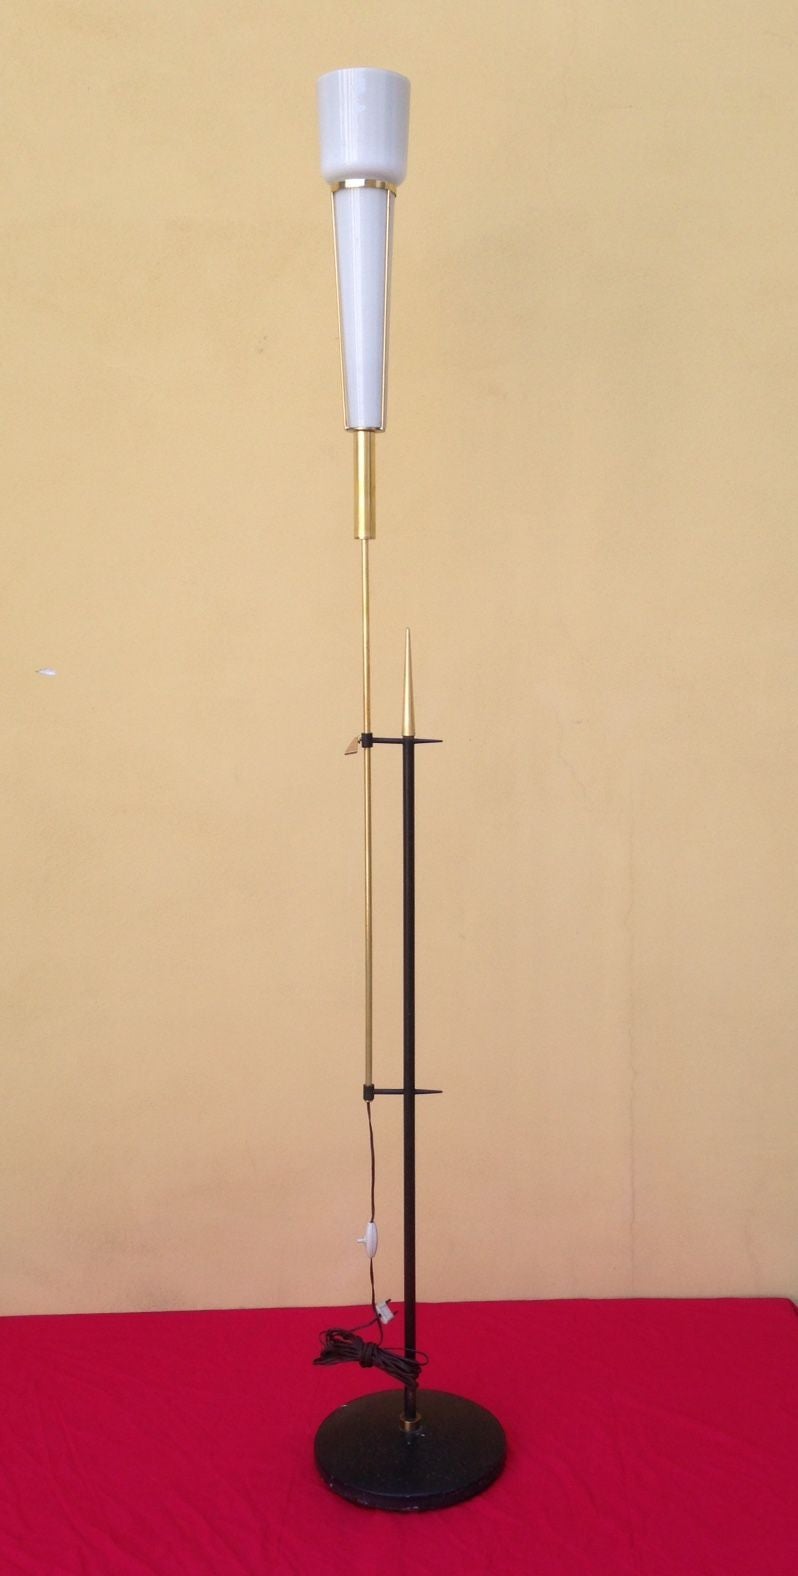 Rare and very elegant adjustable floor lamp, the brass pole with the glass diffuser can be raised or lowered. 
Maximum high is cm 189 and the minimum is cm 162.
Original conditions.